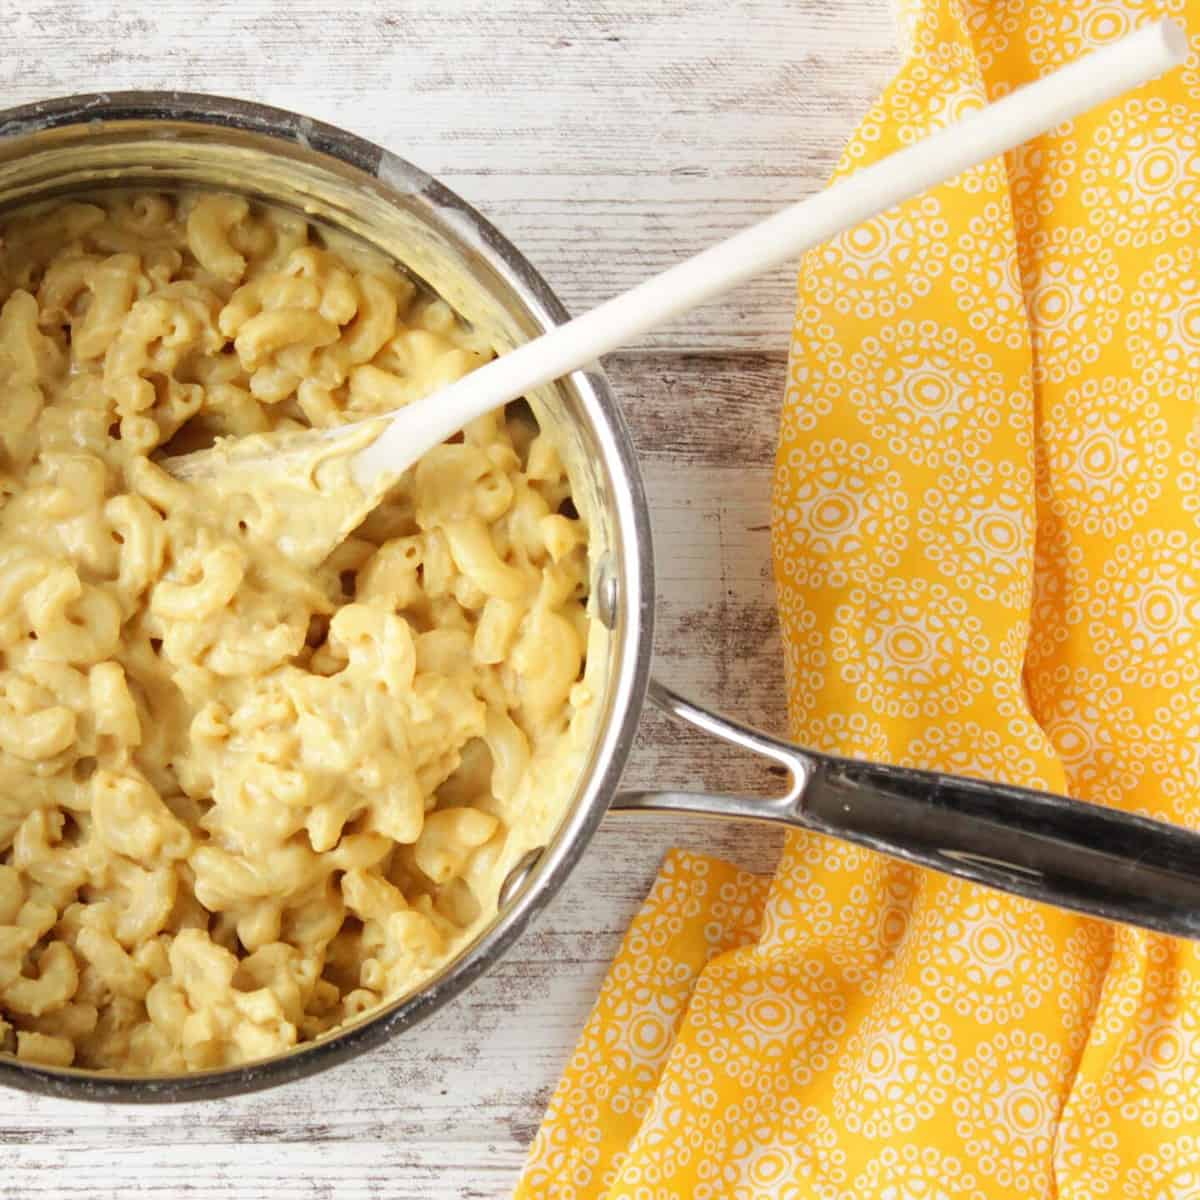  You won't believe this recipe is vegan! It's so cheesy and delicious.